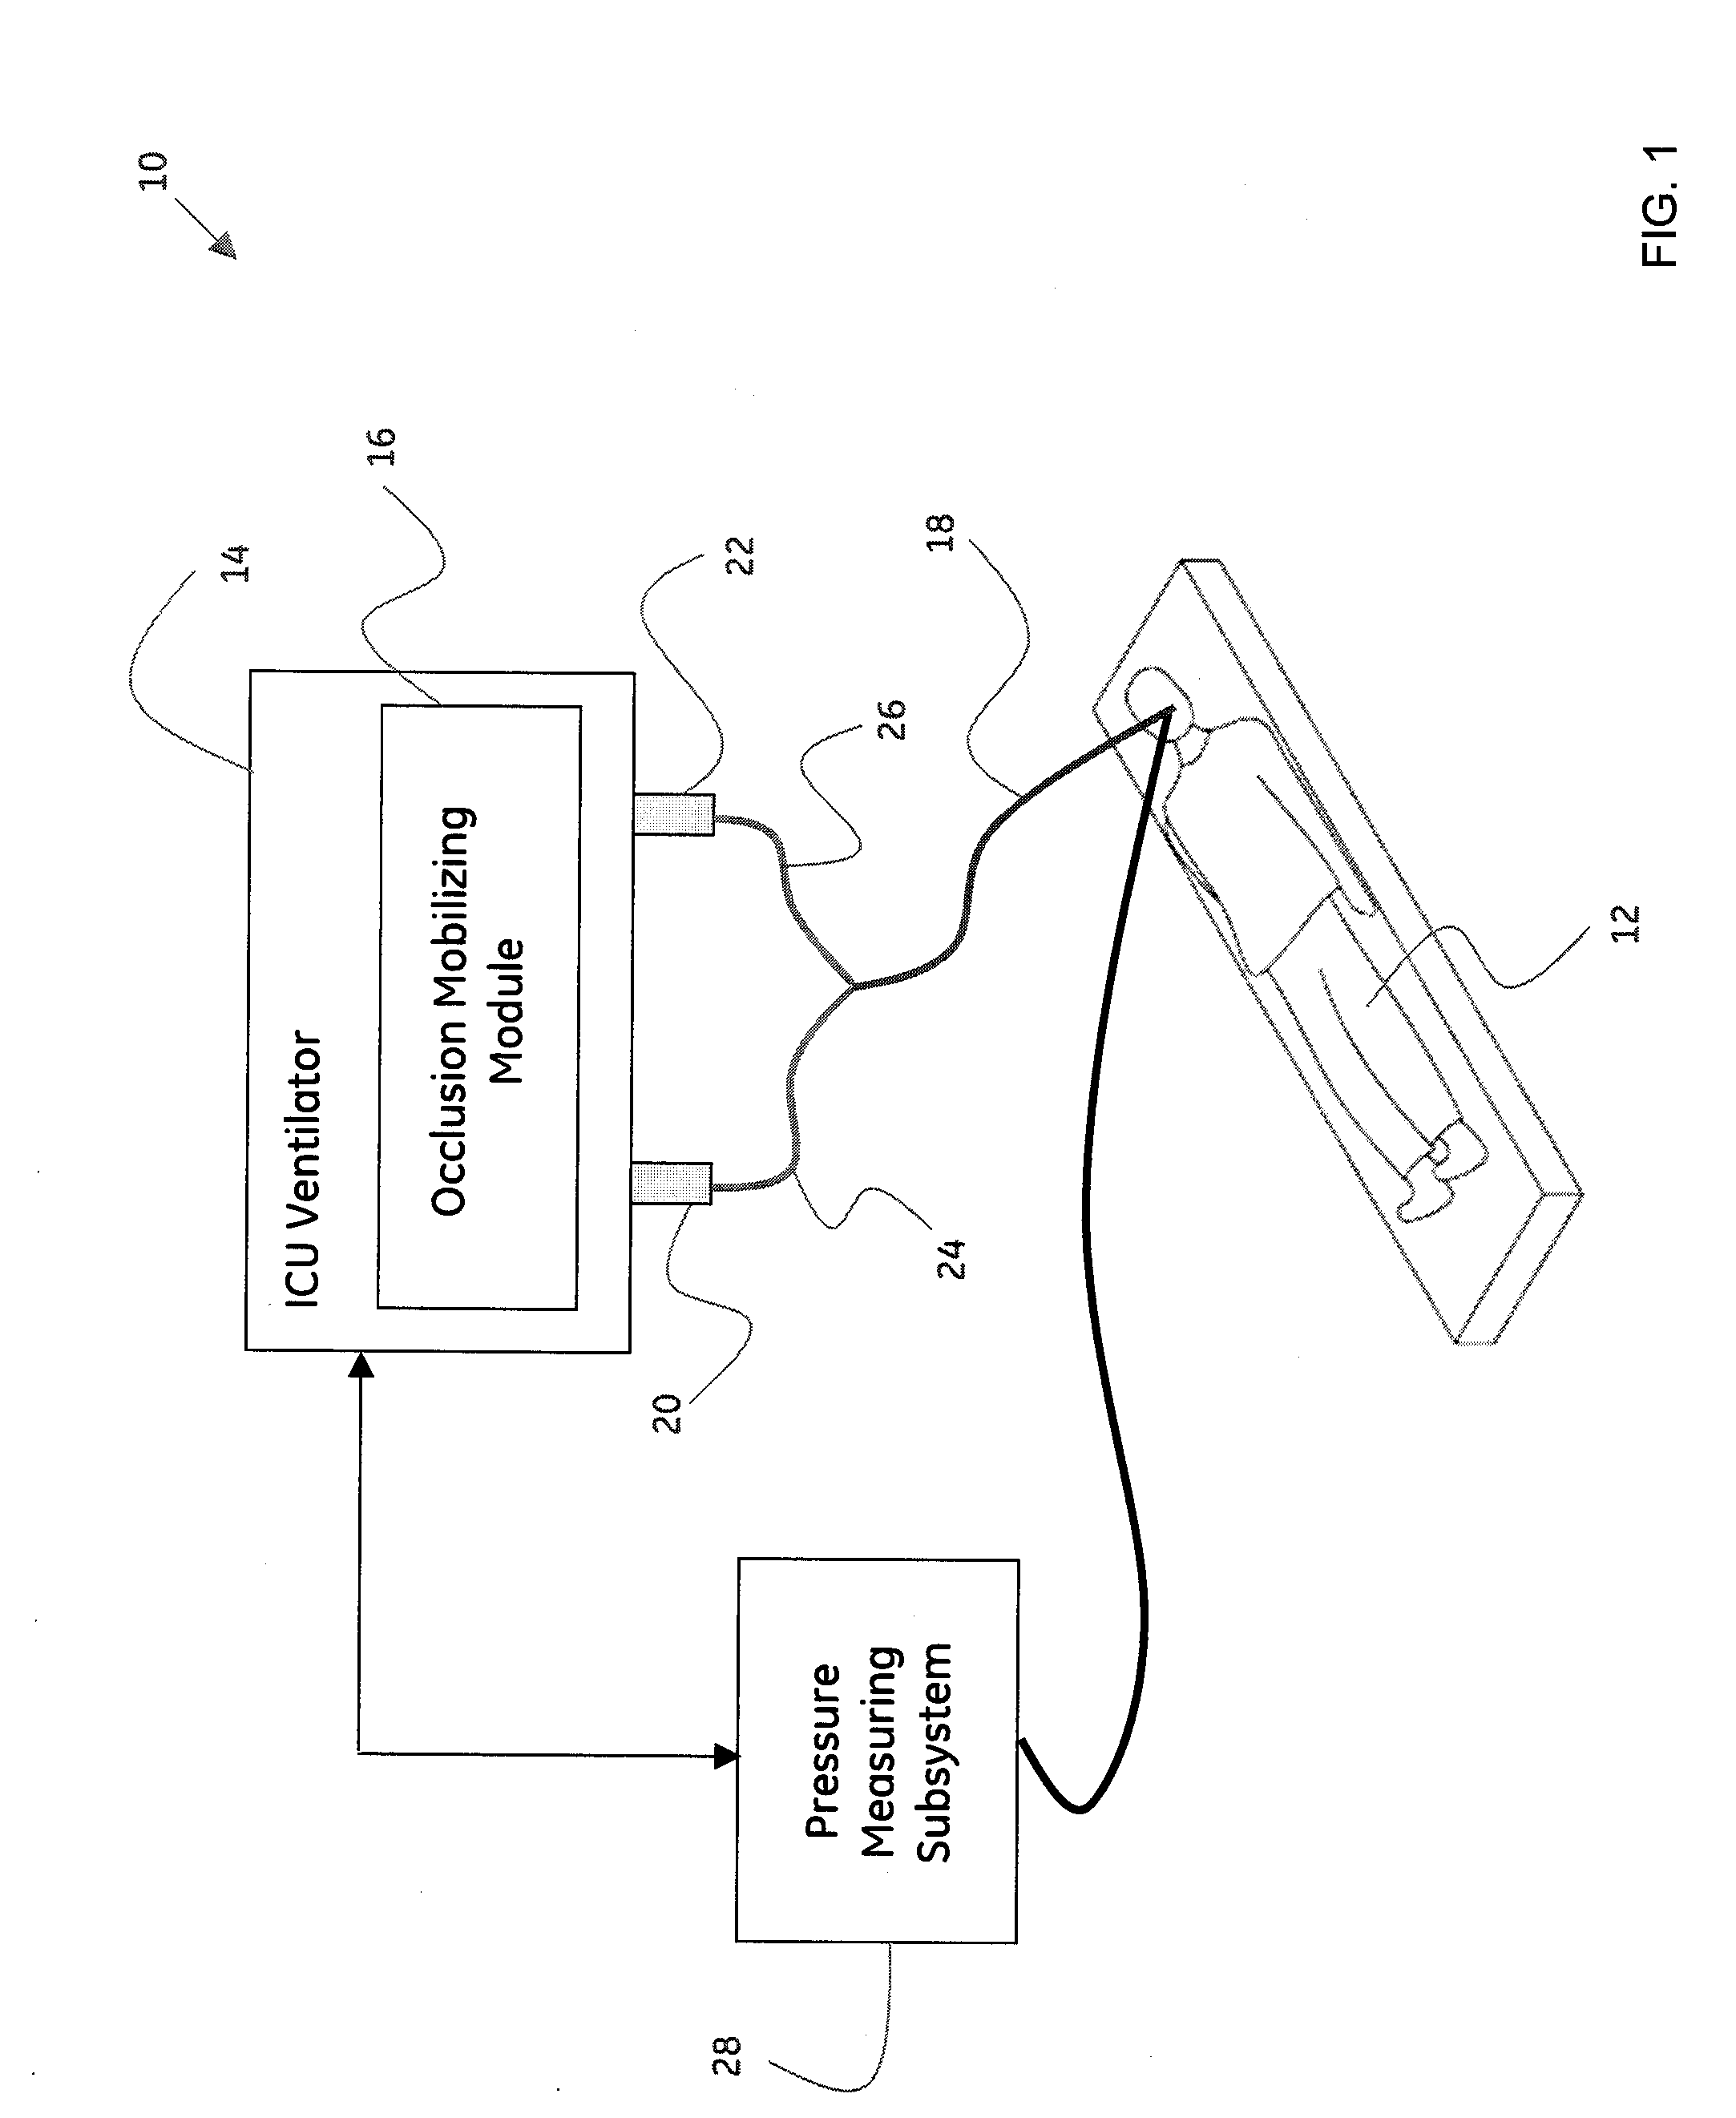 System and method for mobilizing occlusions from a breathing tube